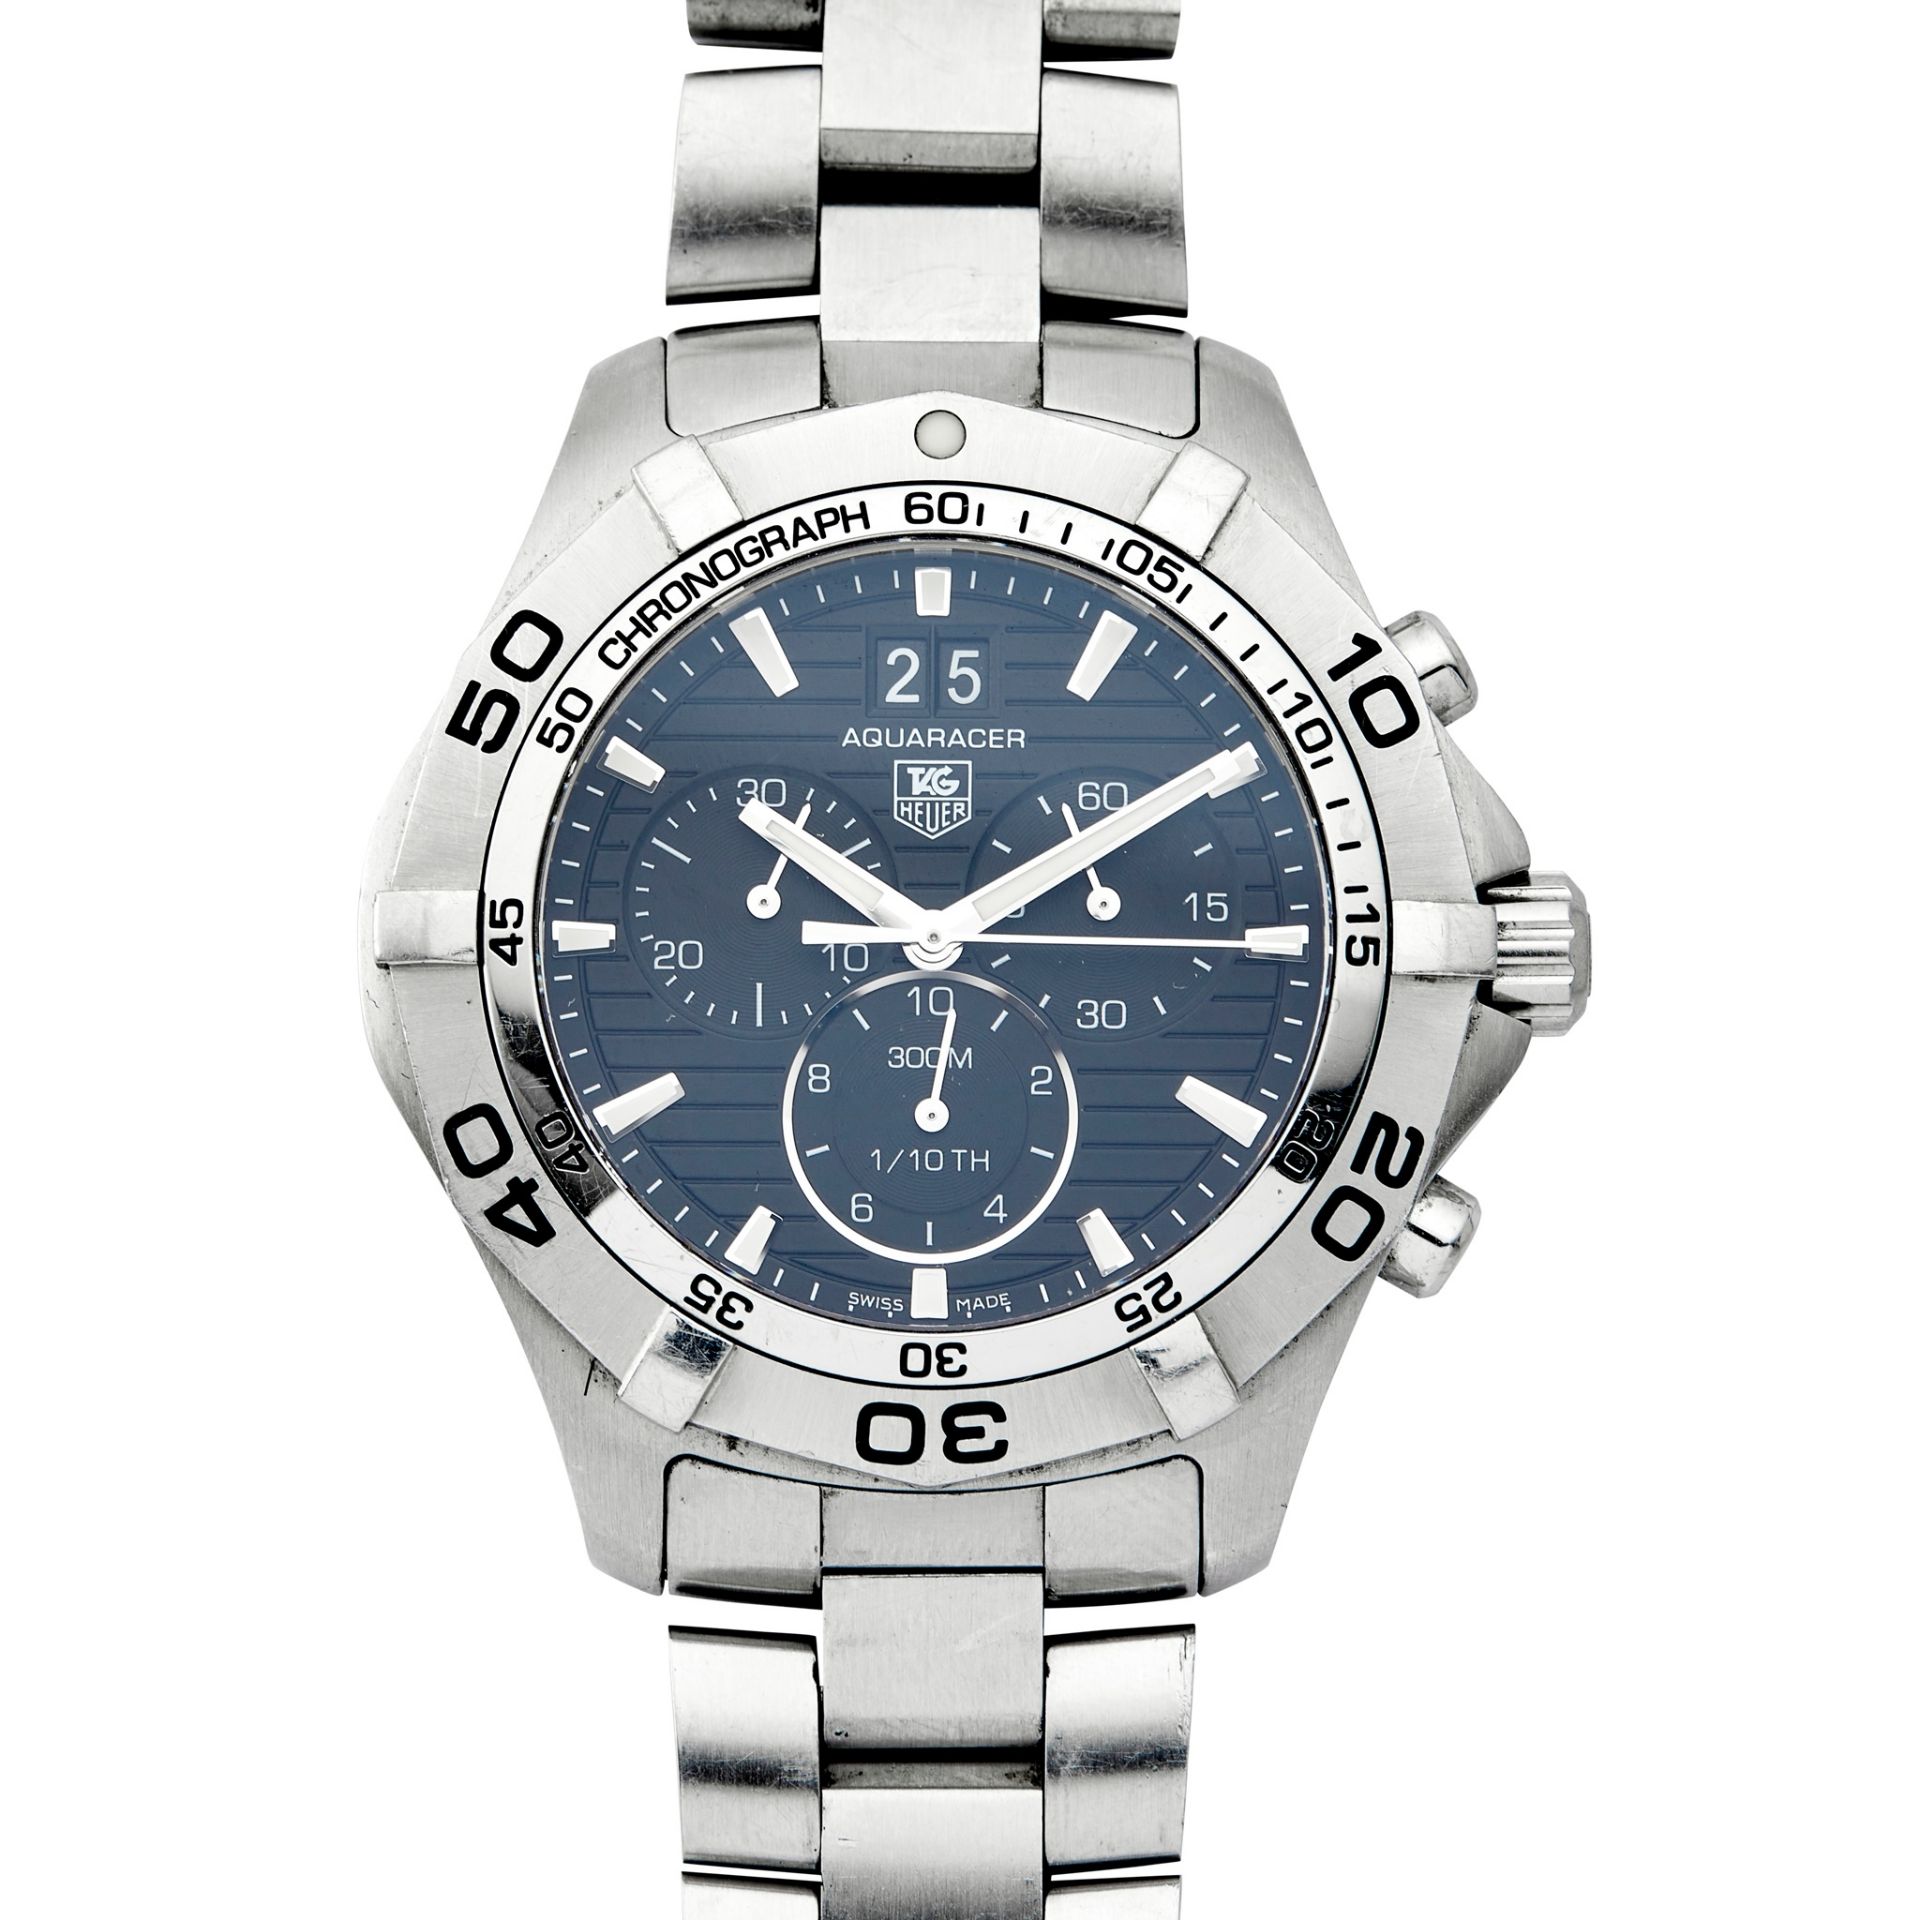 A gentleman's stainless-steel chronograph, Tag Heuer